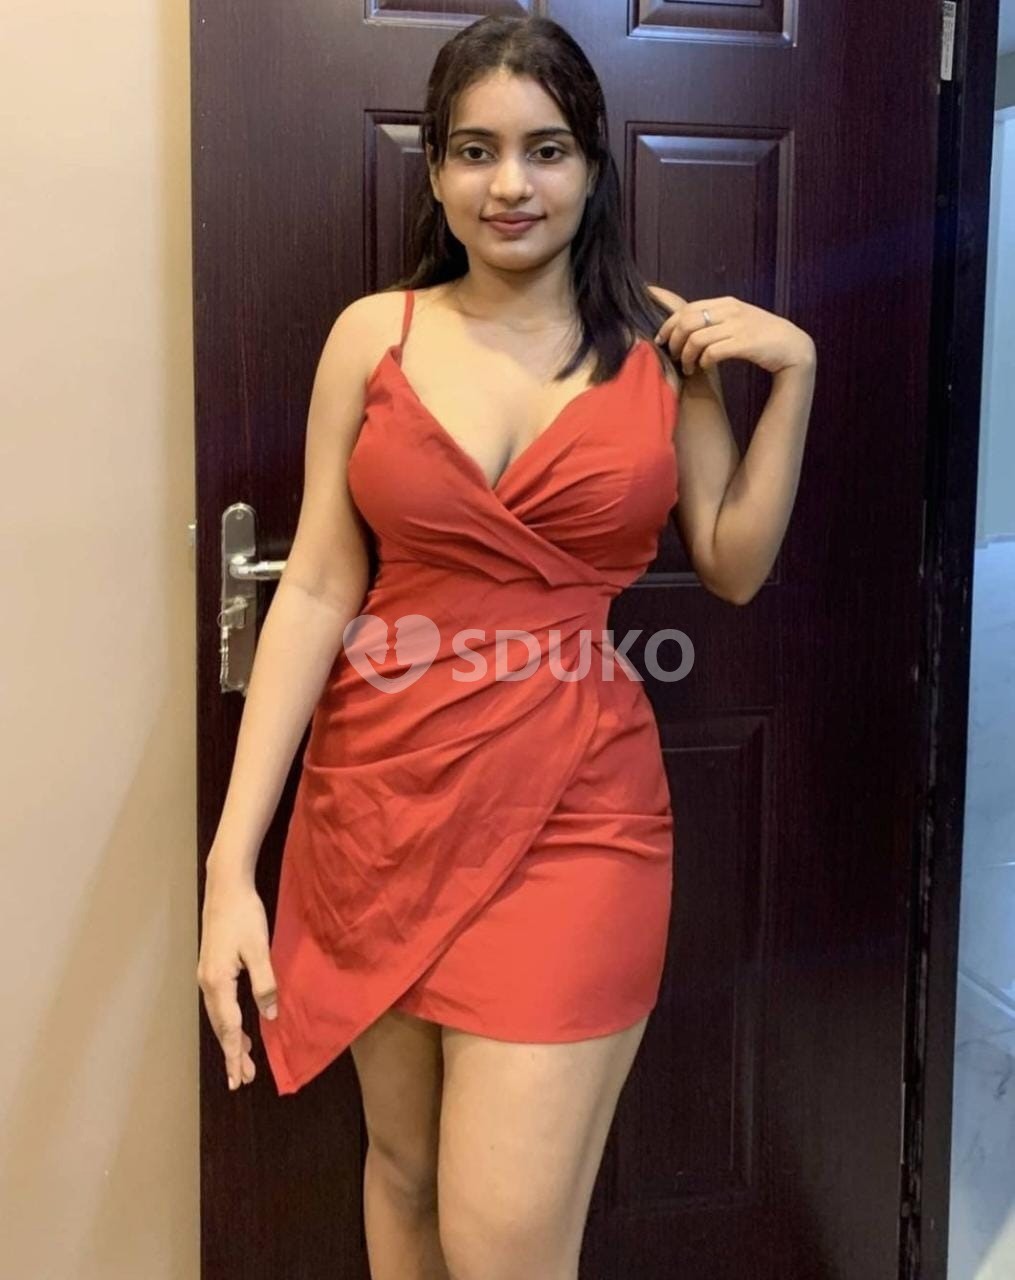 City Banjara hills best call girl service available 24 hours full safe and secure...